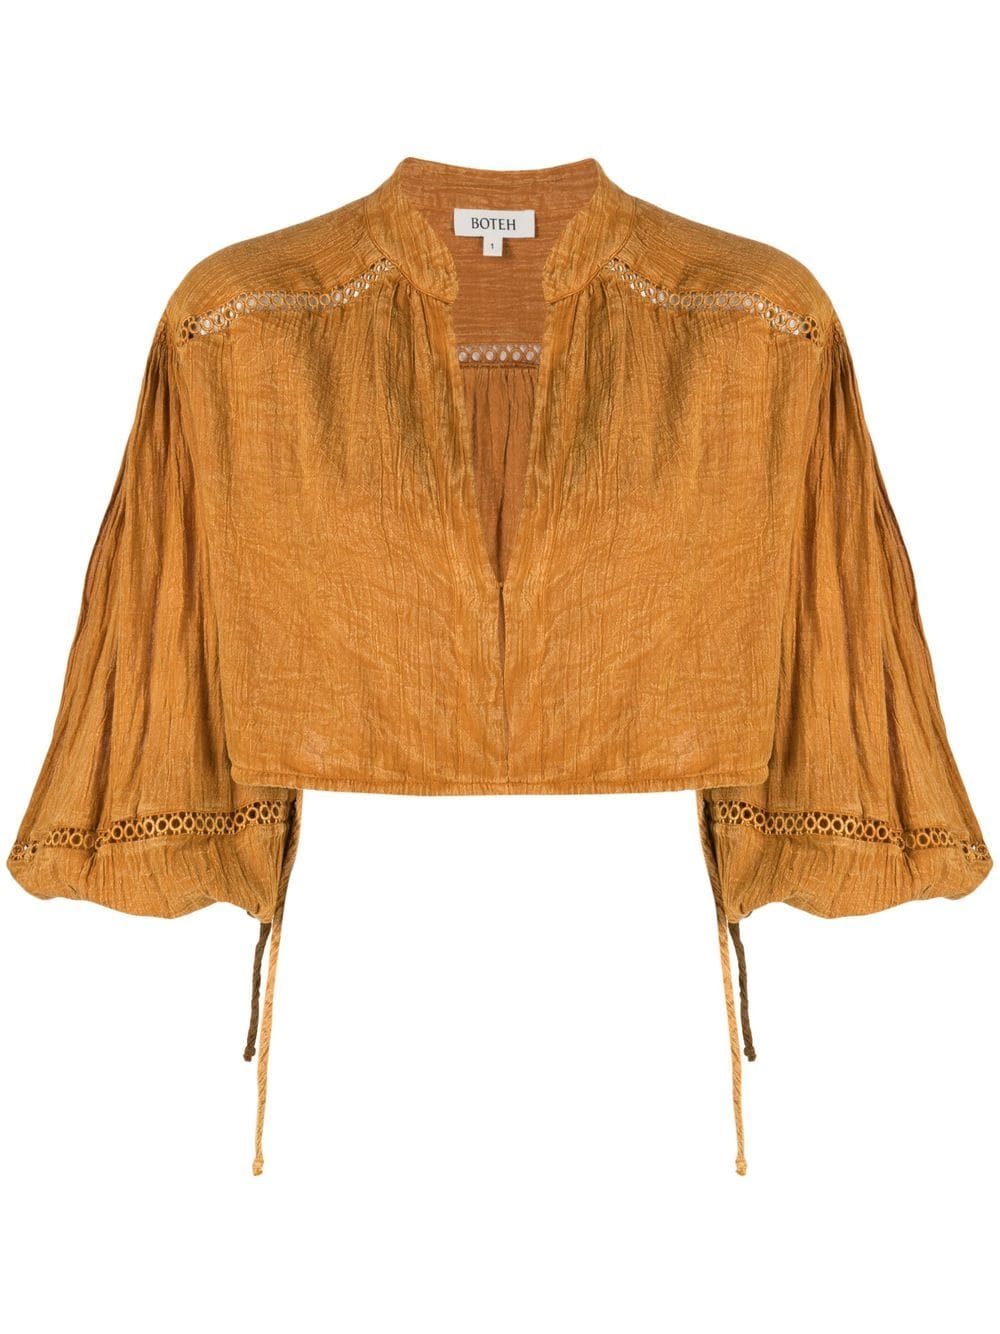 BOTEH cropped long-sleeve blouse